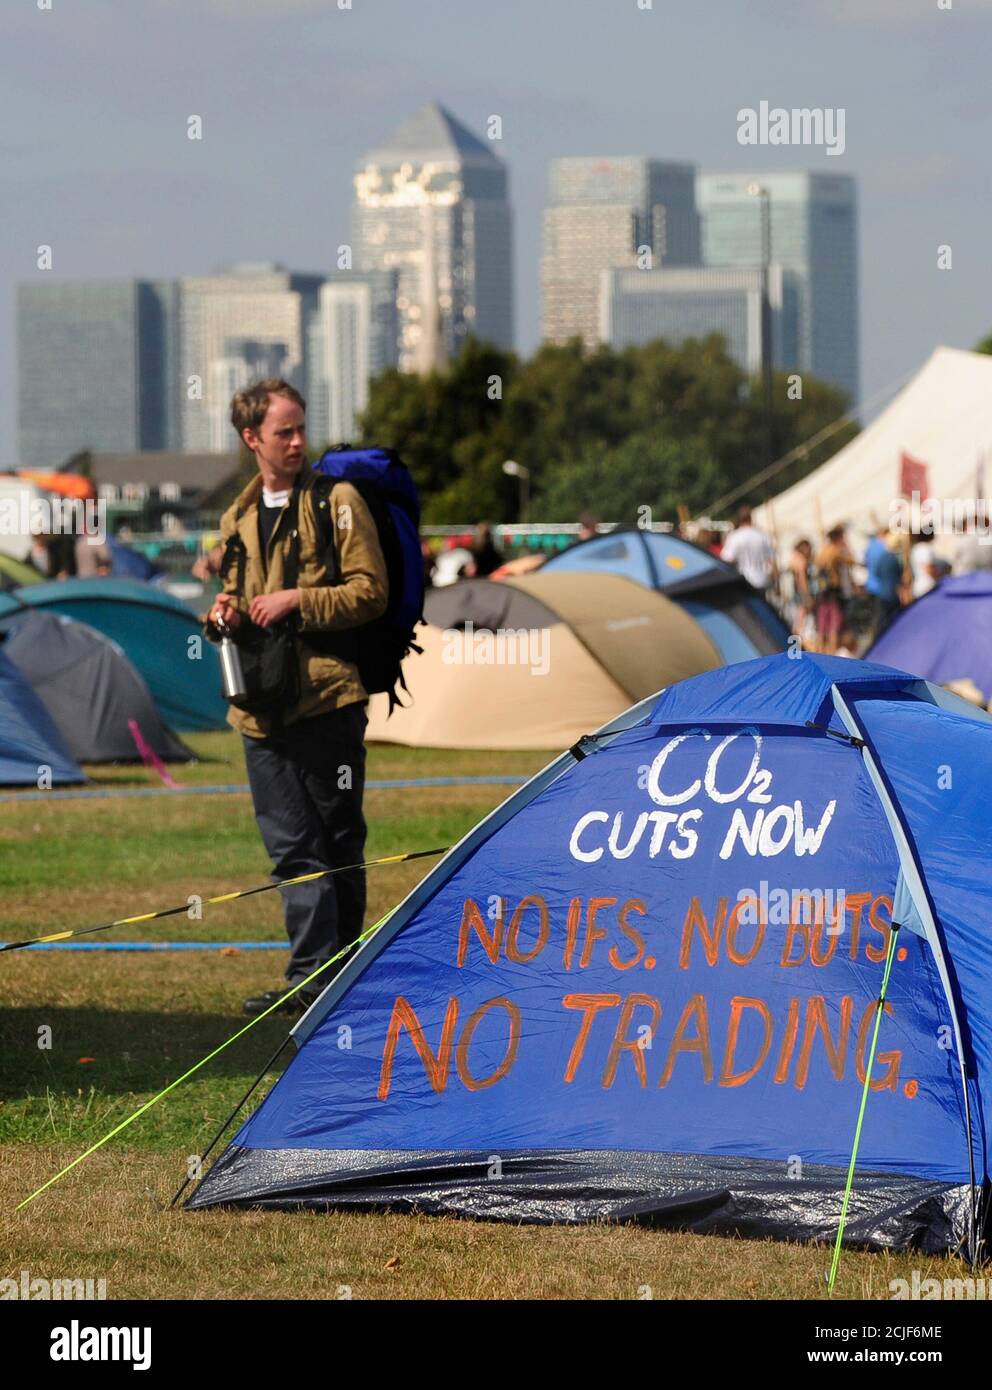 An environmental protester stands next to a camp set up in Blackheath with the Canary Wharf financial district visible behind in southeast London August 27, 2009. Environmentalists demanding an overhaul of the world economy to help save the planet met in London on Wednesday for a week-long camp, one of the biggest tests of the capital's police since the G20 demonstrations. REUTERS/Toby Melville (BRITAIN CONFLICT ENVIRONMENT) Stock Photo